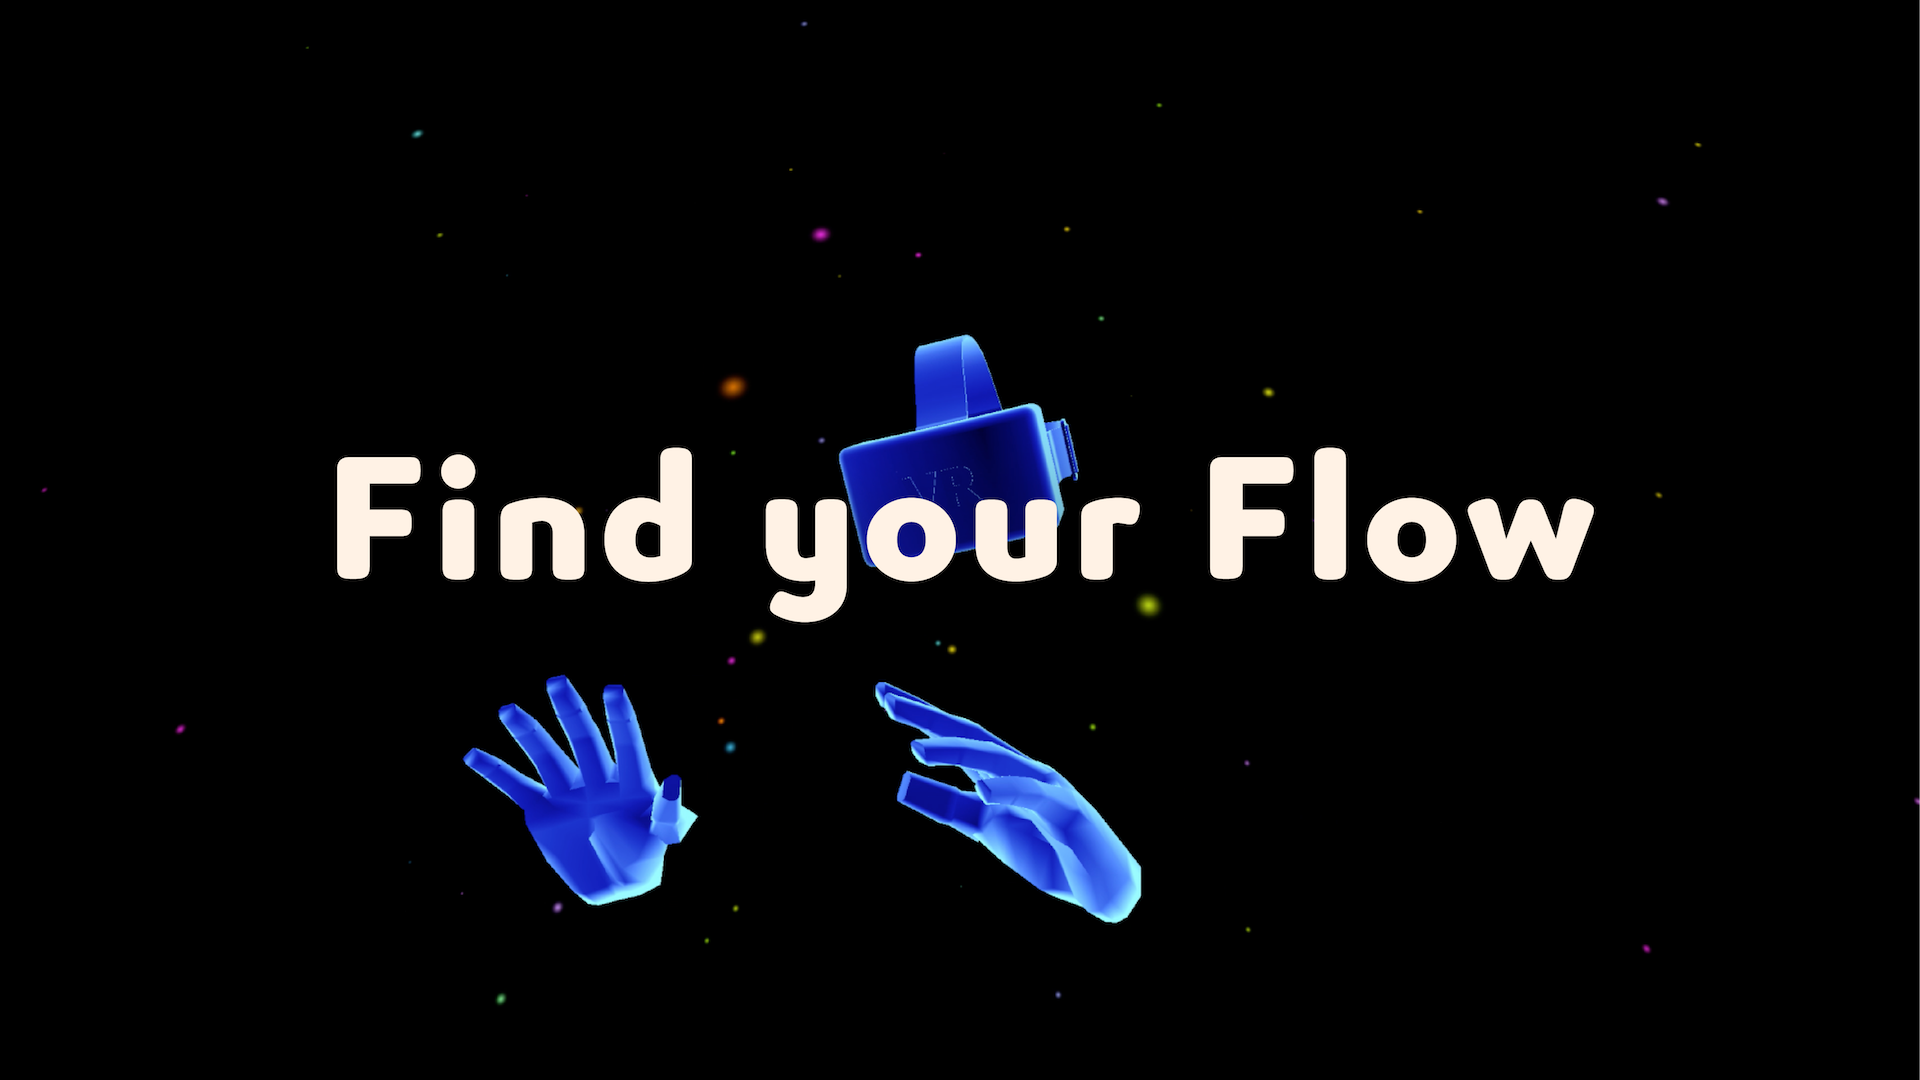 Announcing the Holos Beta: Find your Flow